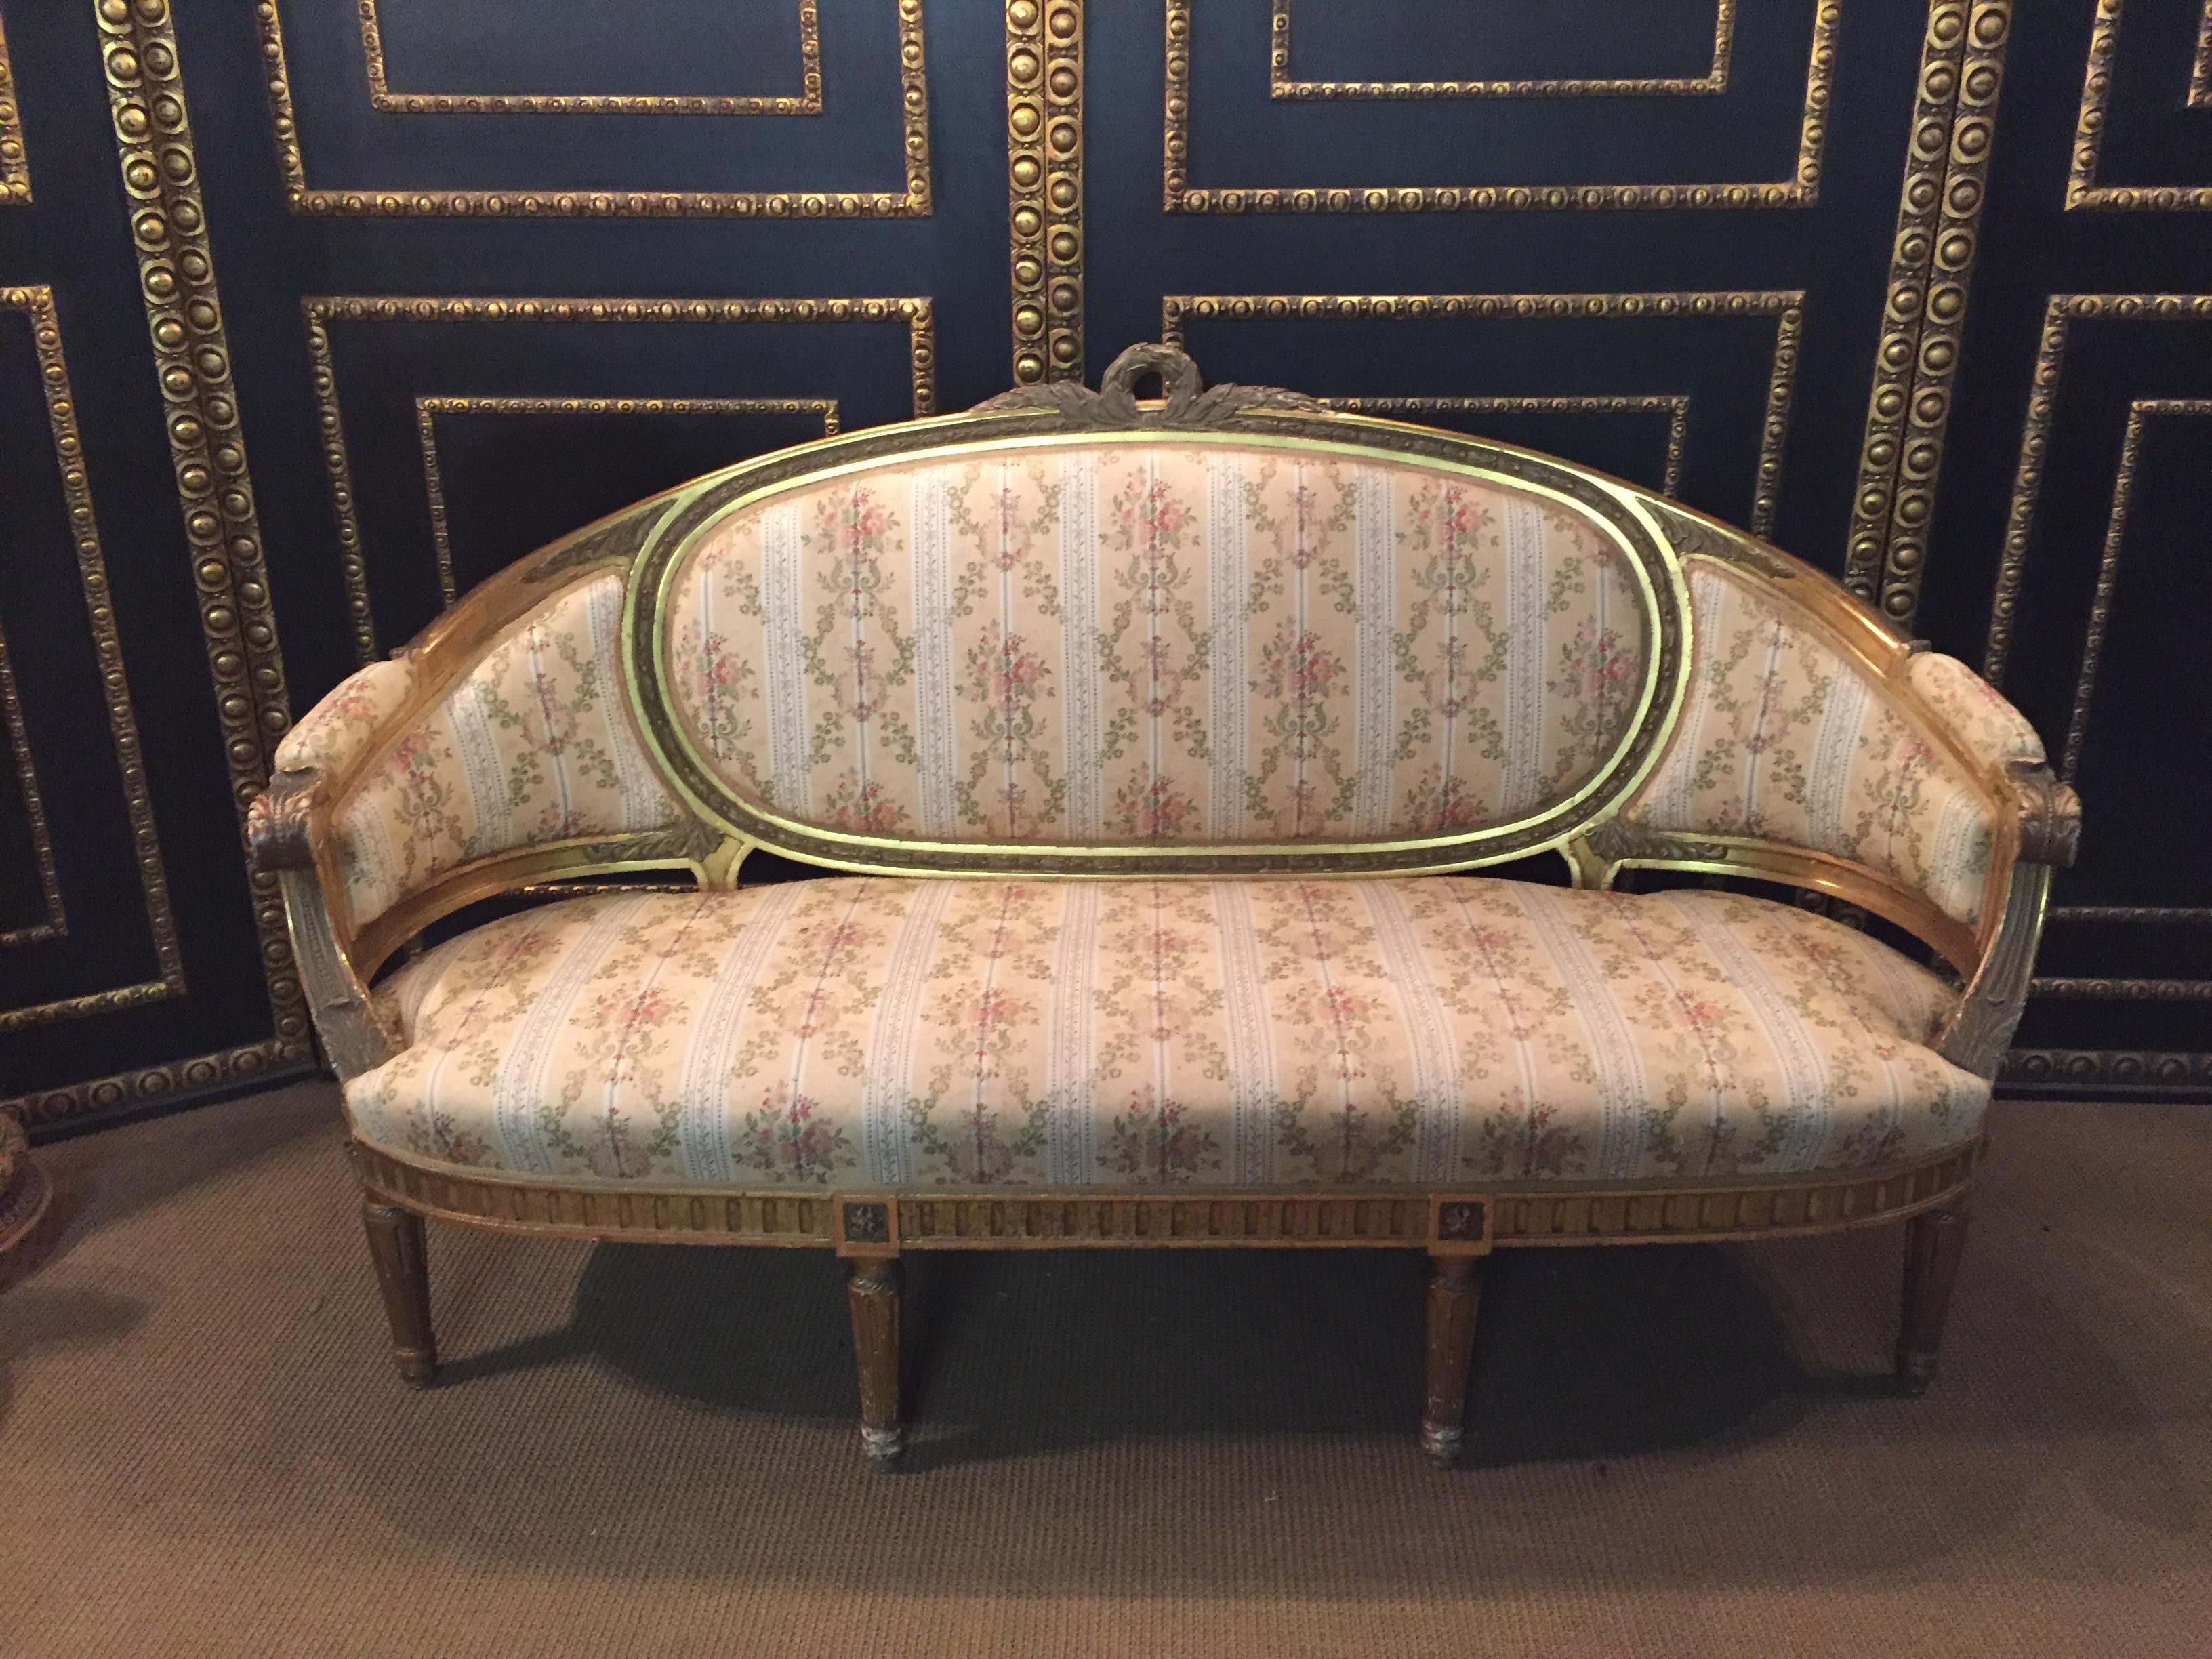 Solid beechwood, finely carved,
poliment gilded and partial sheet gilded. Cambered and carved frame on carved, tapering legs. Curved armrests. Flanked by relieved leaf rosettes. Rising armrests in medallion-shaped back frame with carved crown